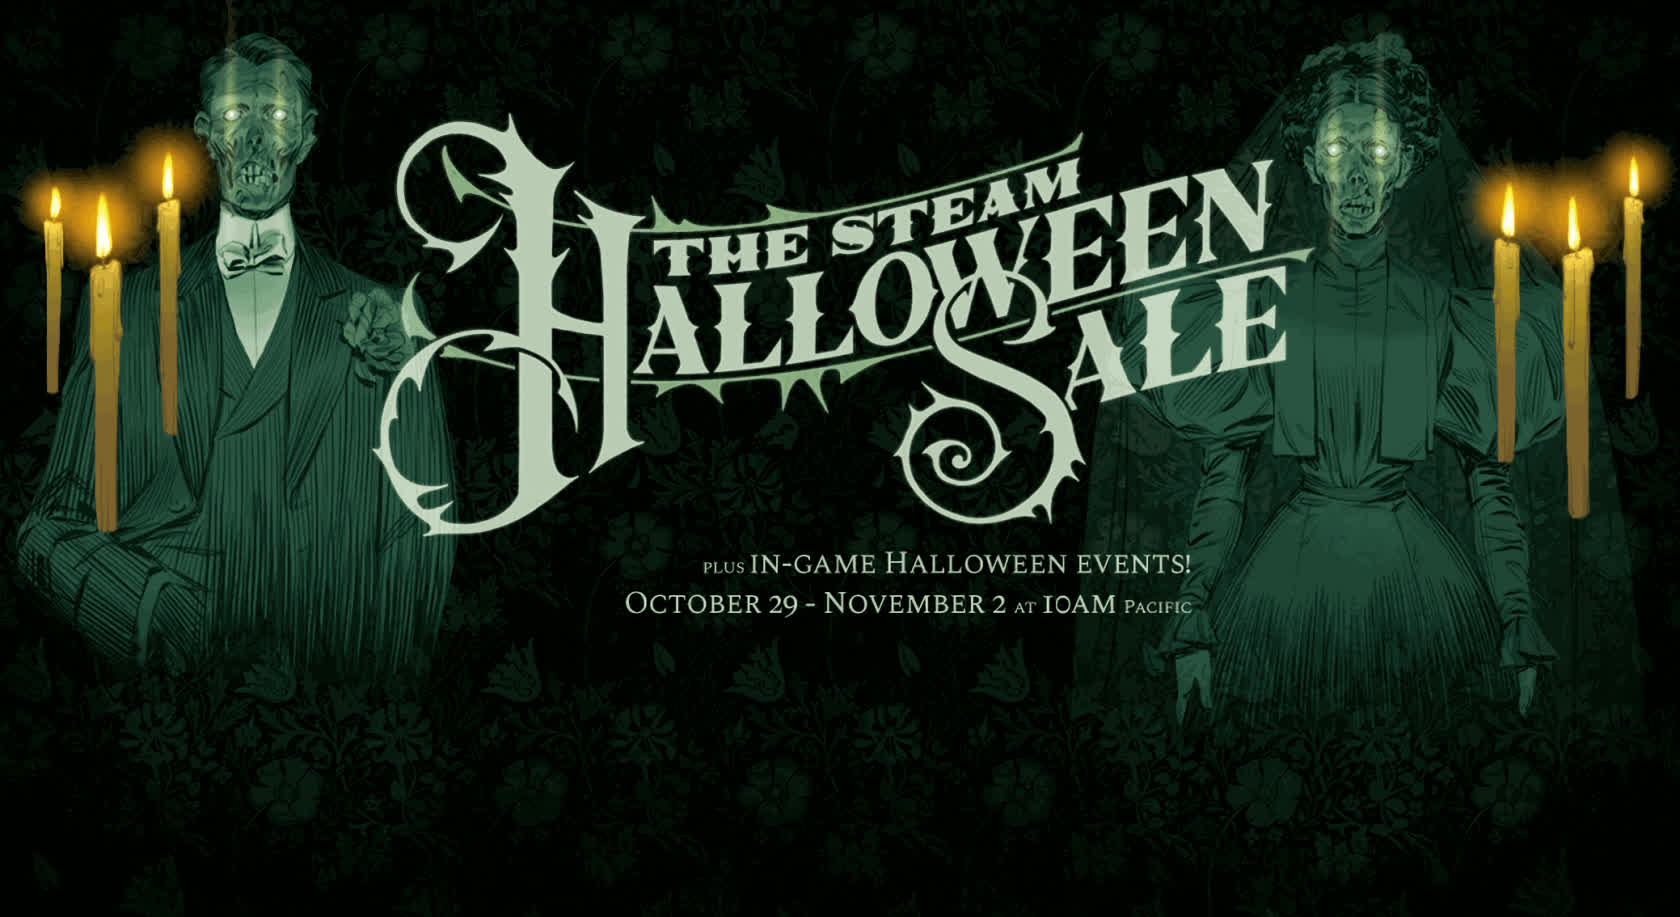 Steam's Halloween Sale has arrived with hundreds of spooky deals